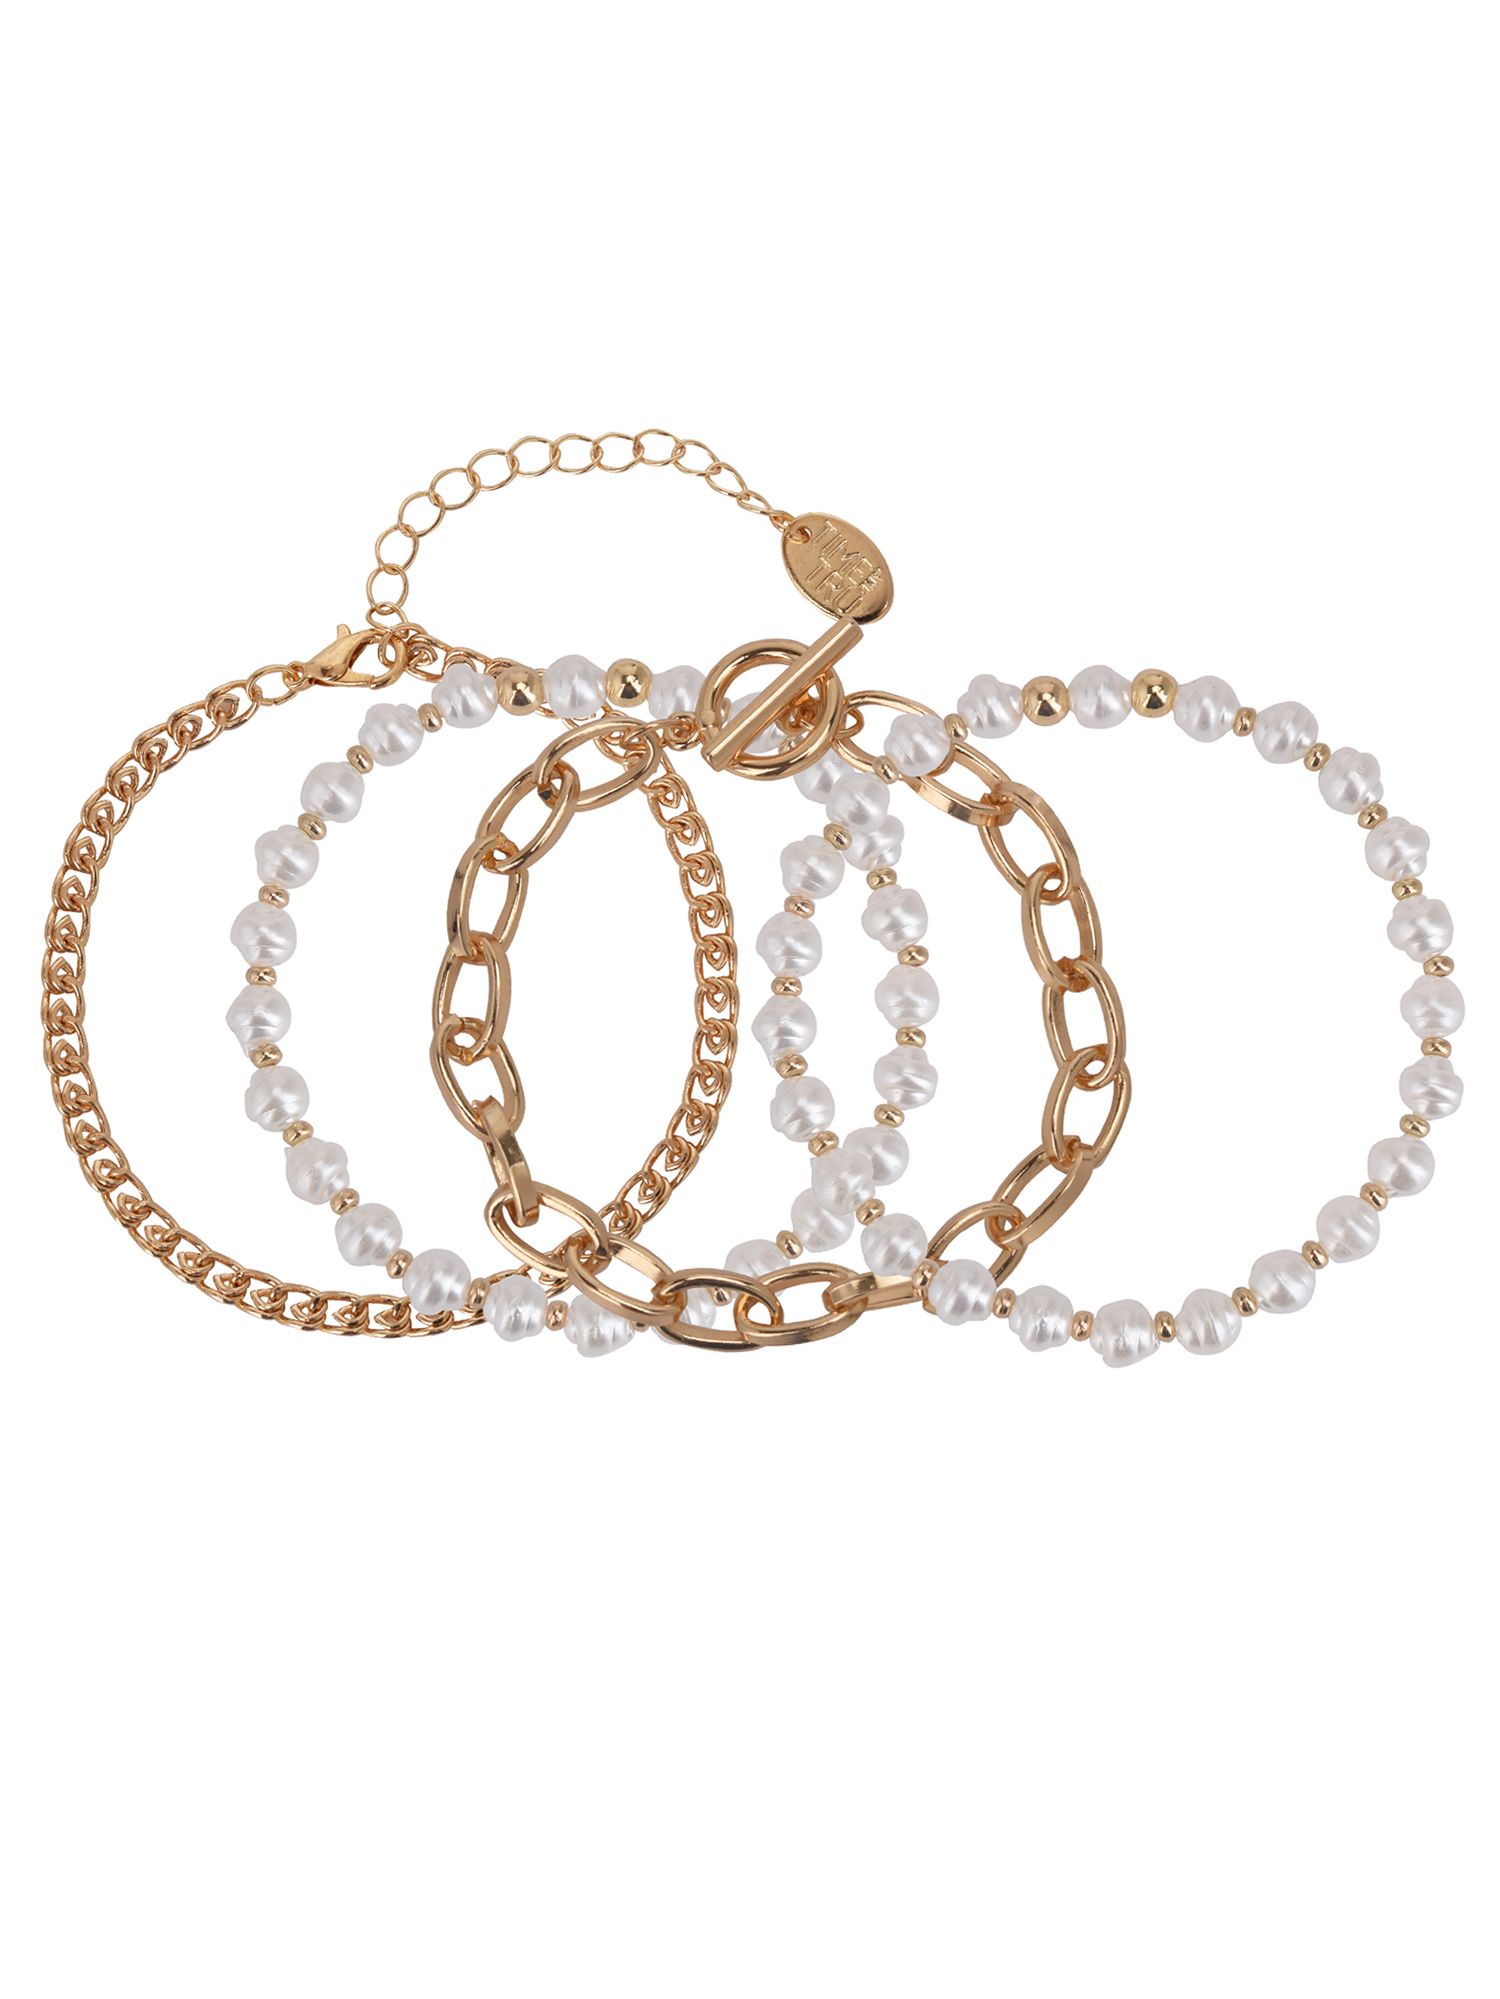 Time and Tru Women's Gold Tone and Faux Pearl Bracelet Set, 4 Piece | Walmart (US)